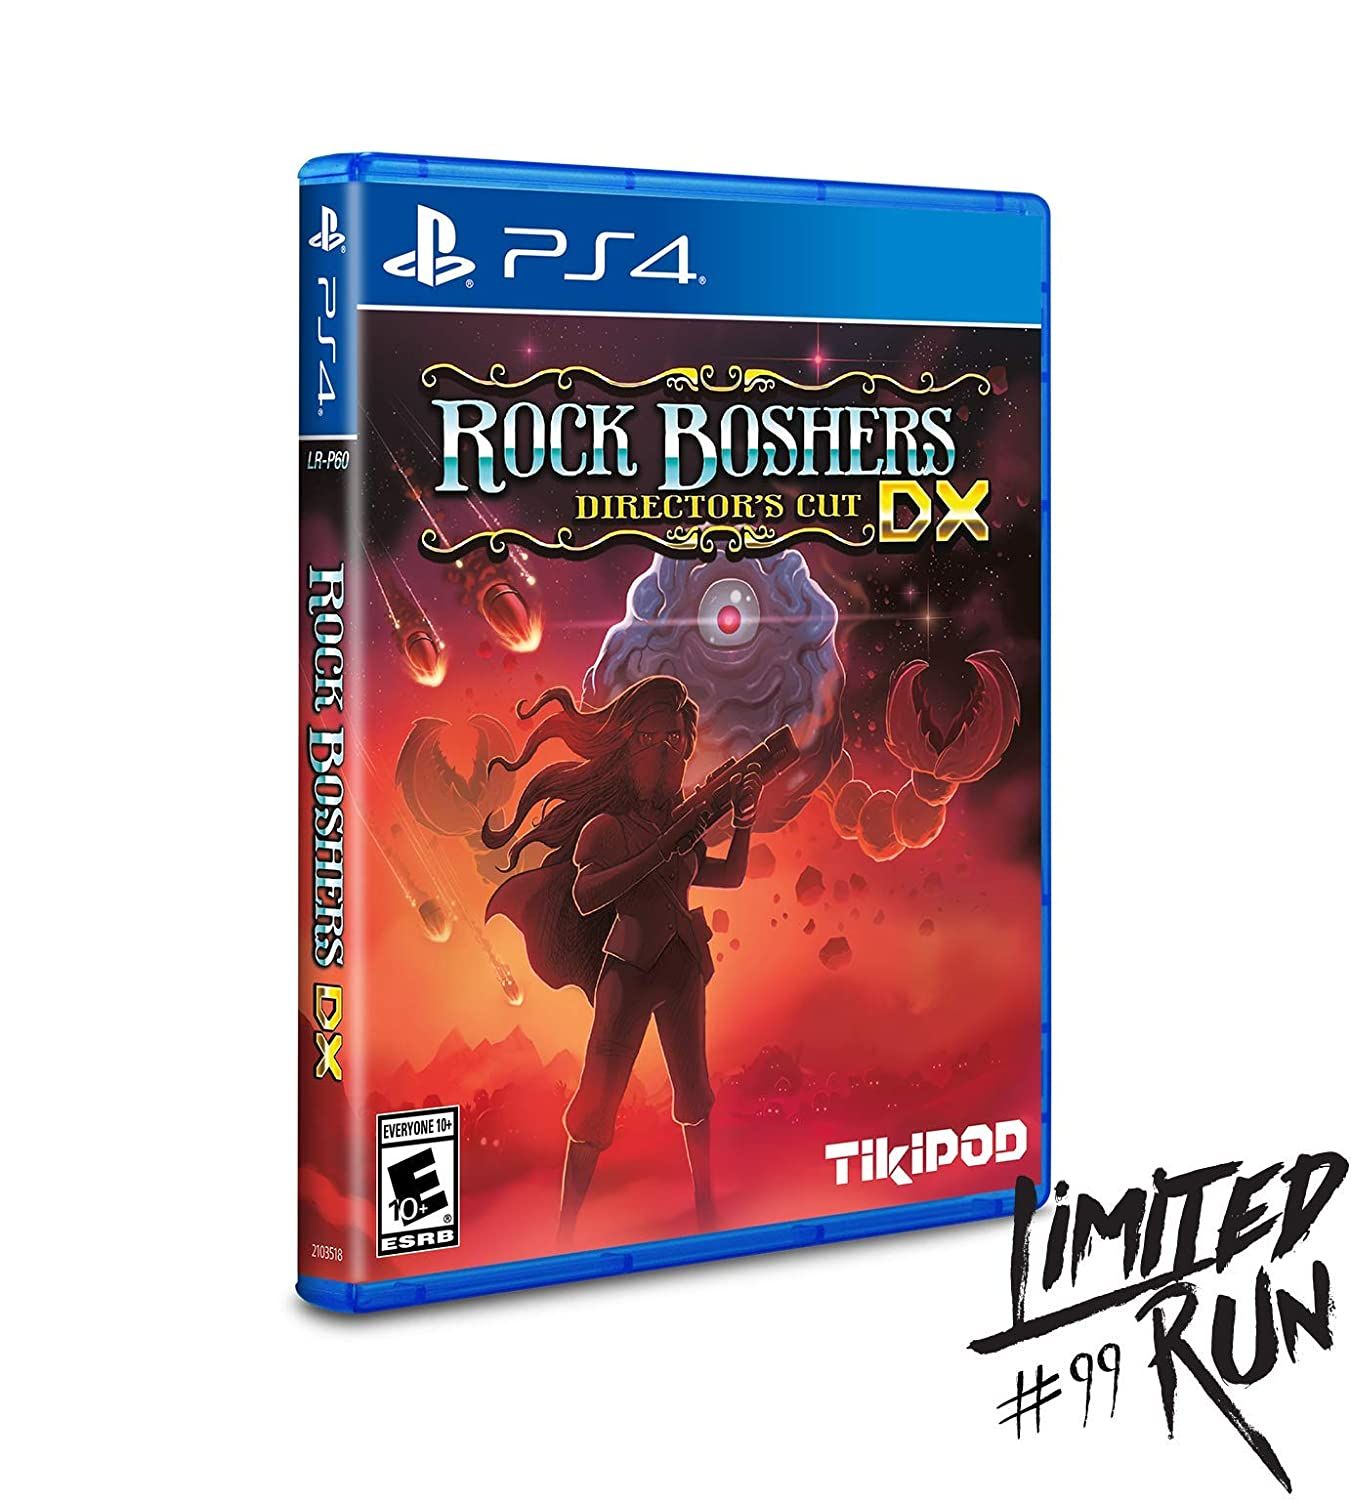 Rock Boshers director's cut DX Limited Run Games